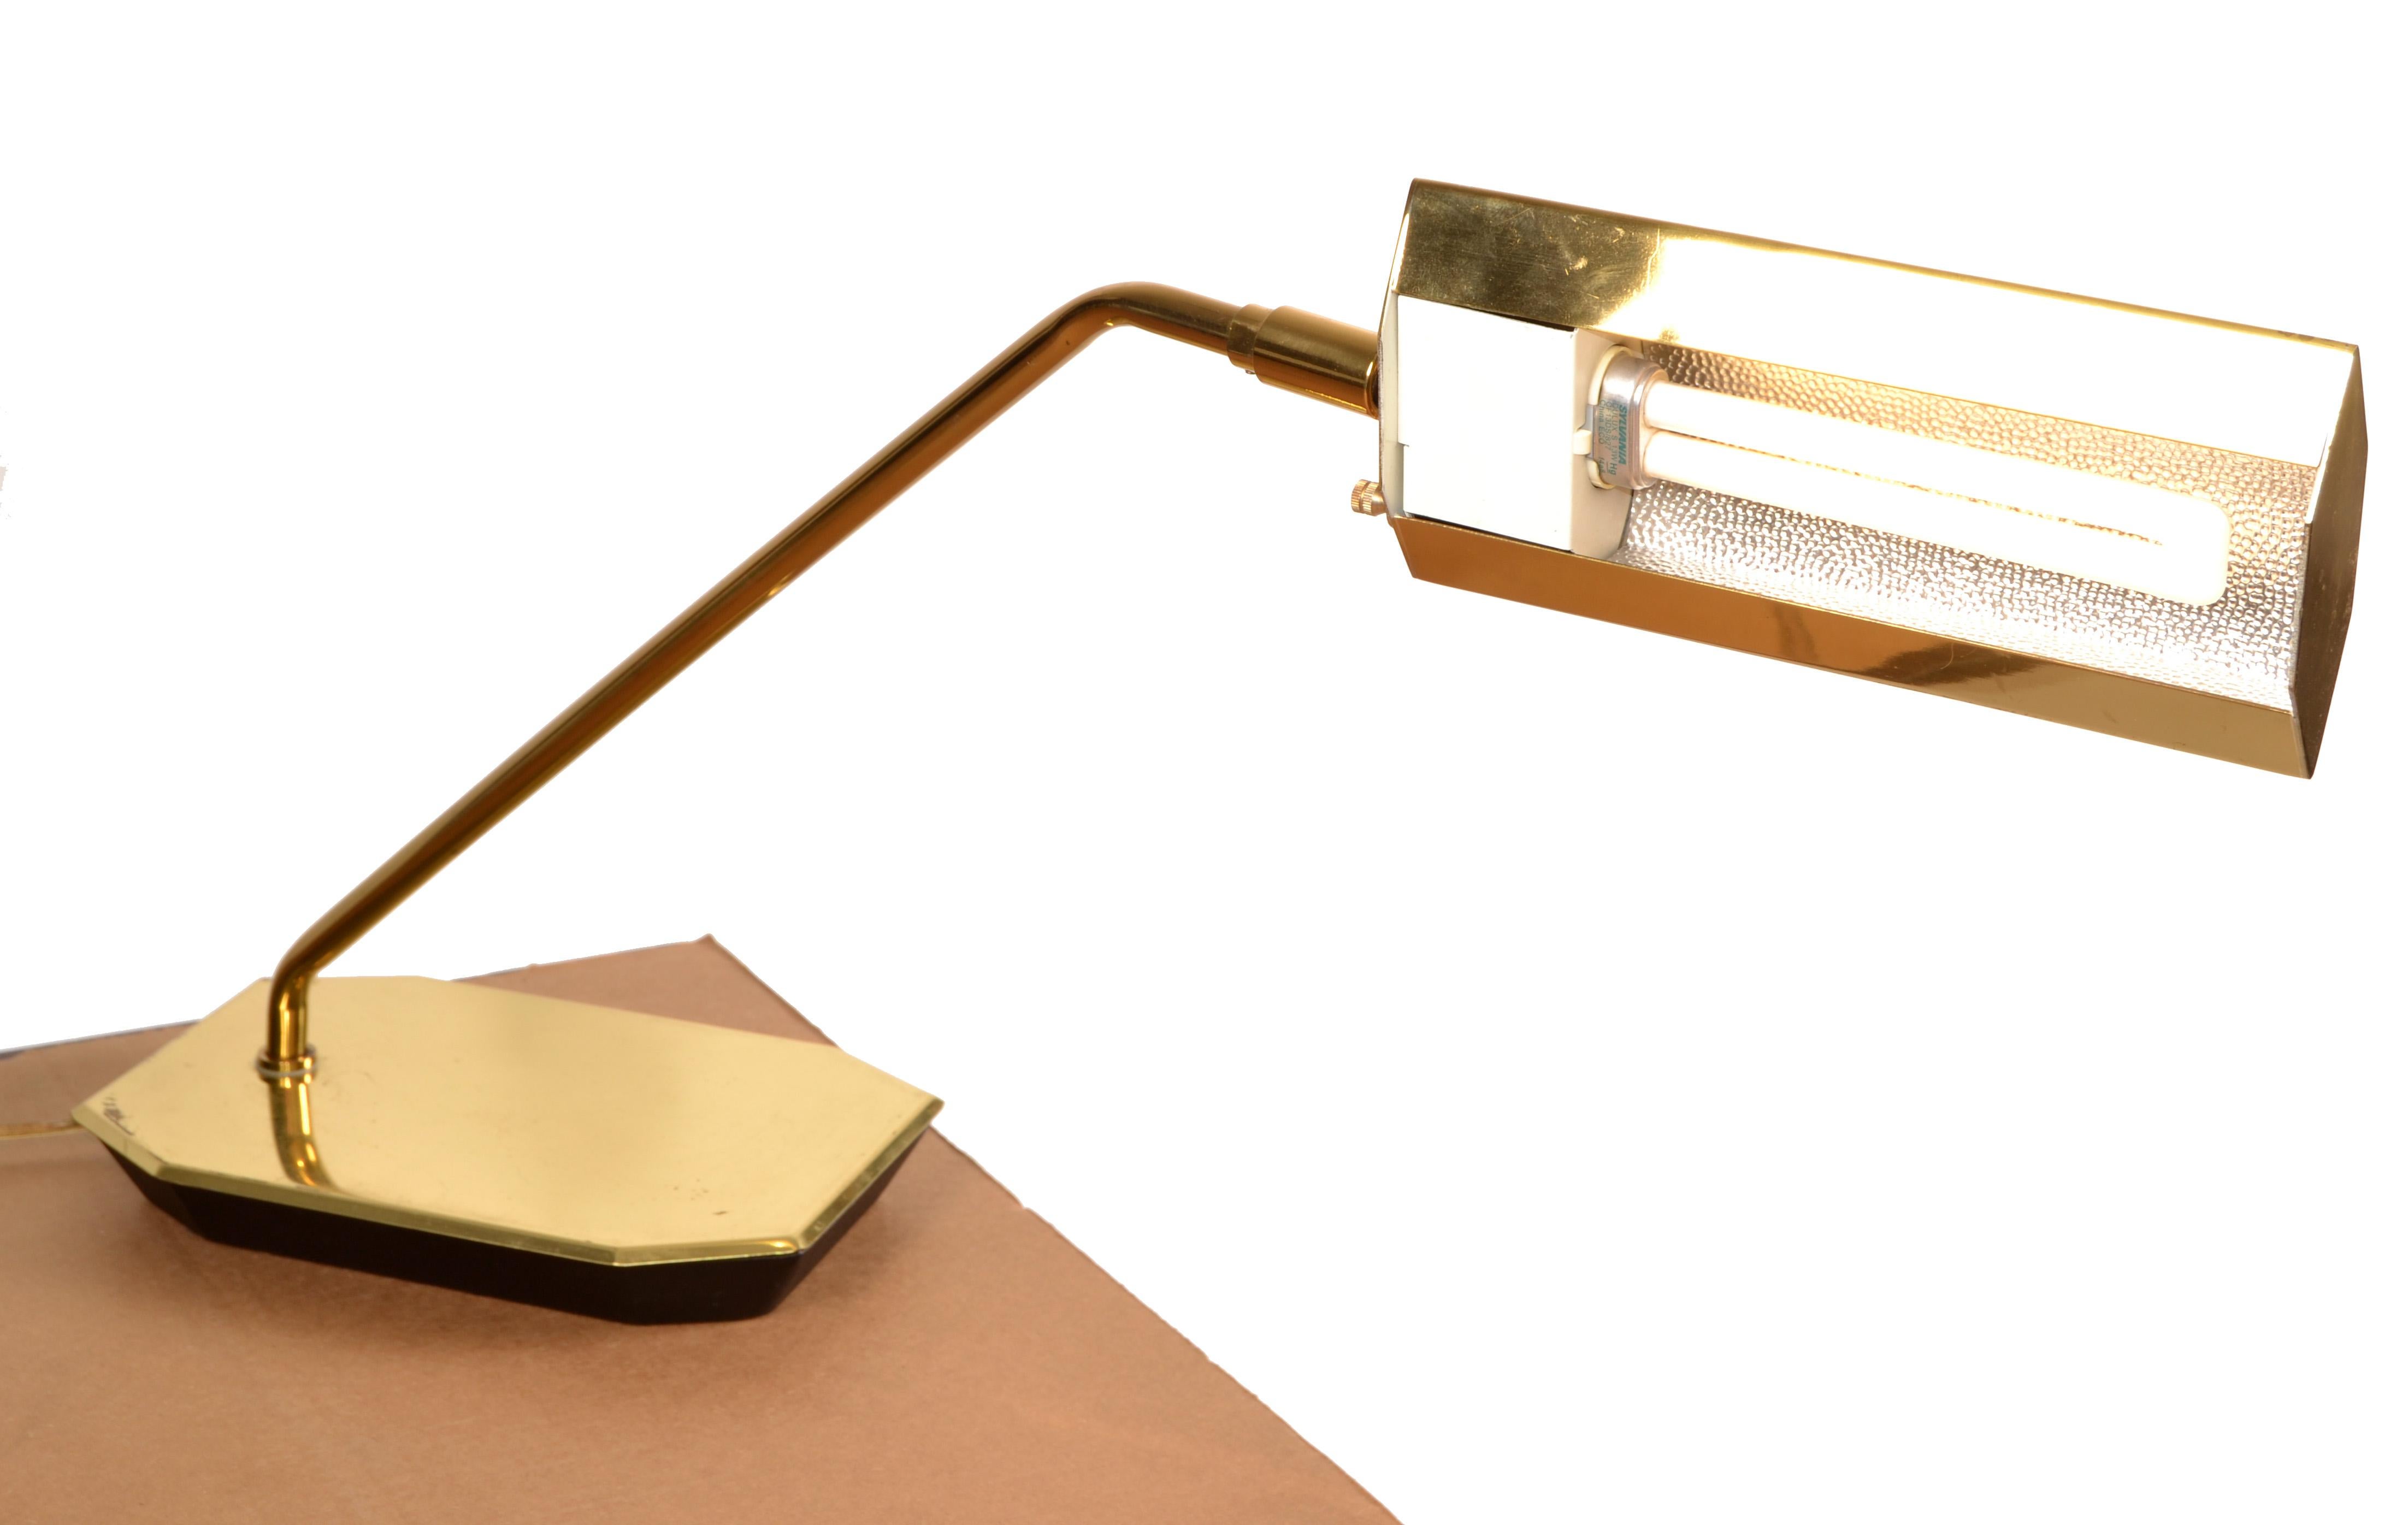 Koch & Lowy Articulated Swing Brass Desk Lamp Mid-Century Modern 1965 Stamped In Good Condition For Sale In Miami, FL